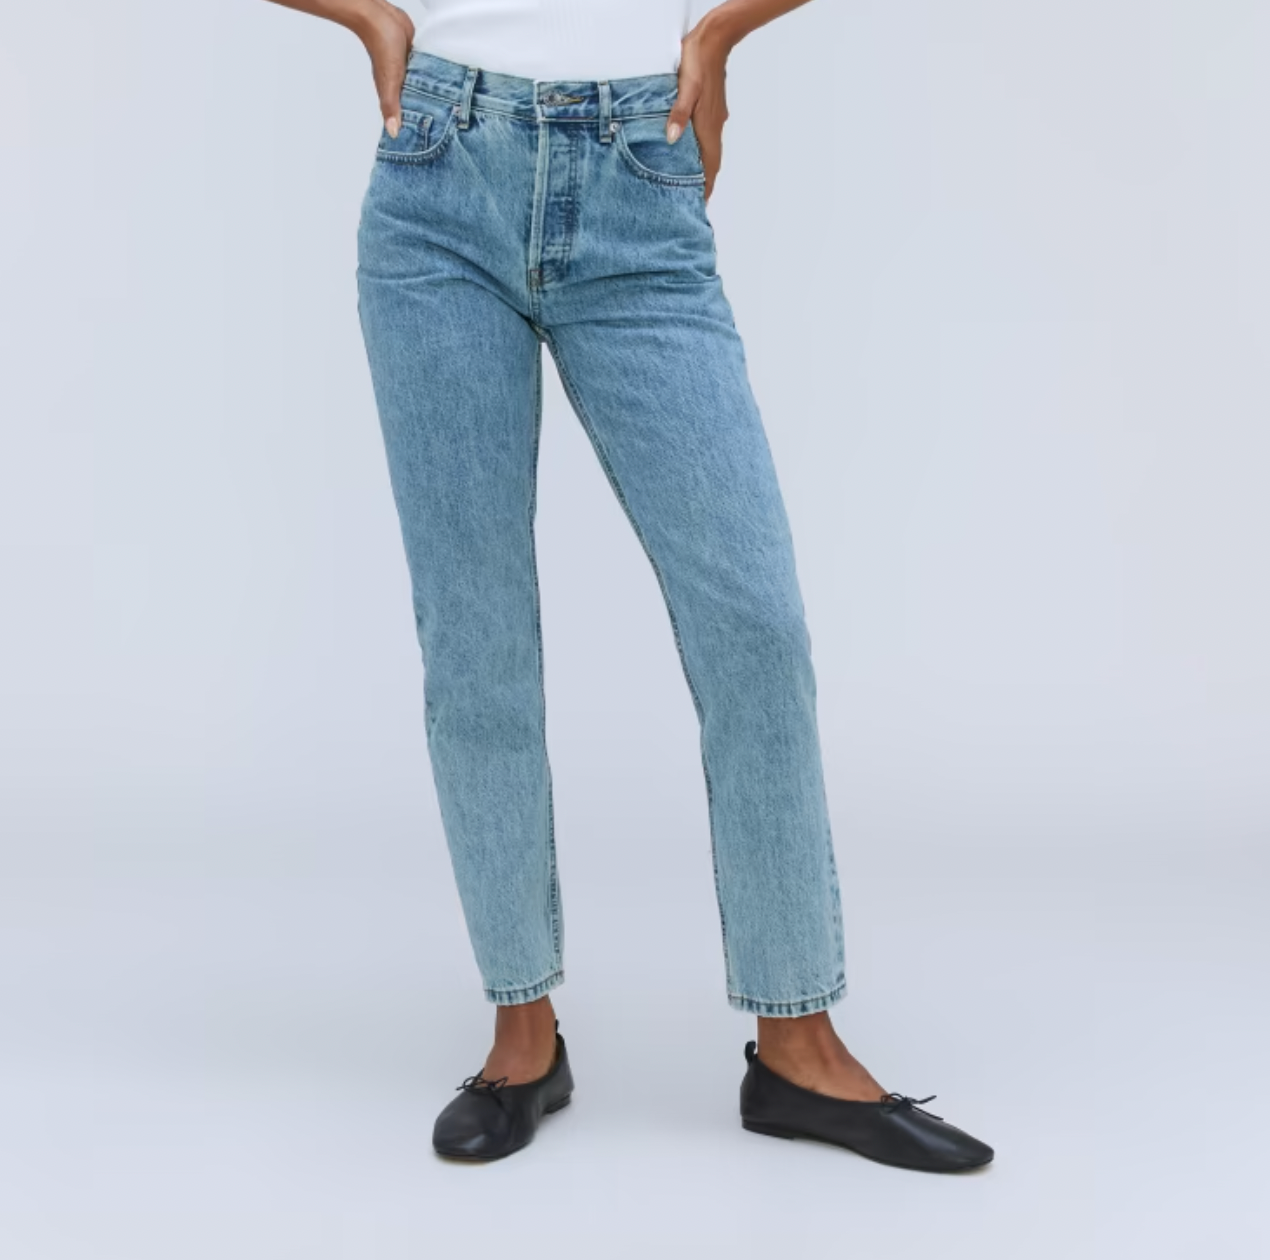 Everlane The ’90s Cheeky Jean Sale | The Strategist